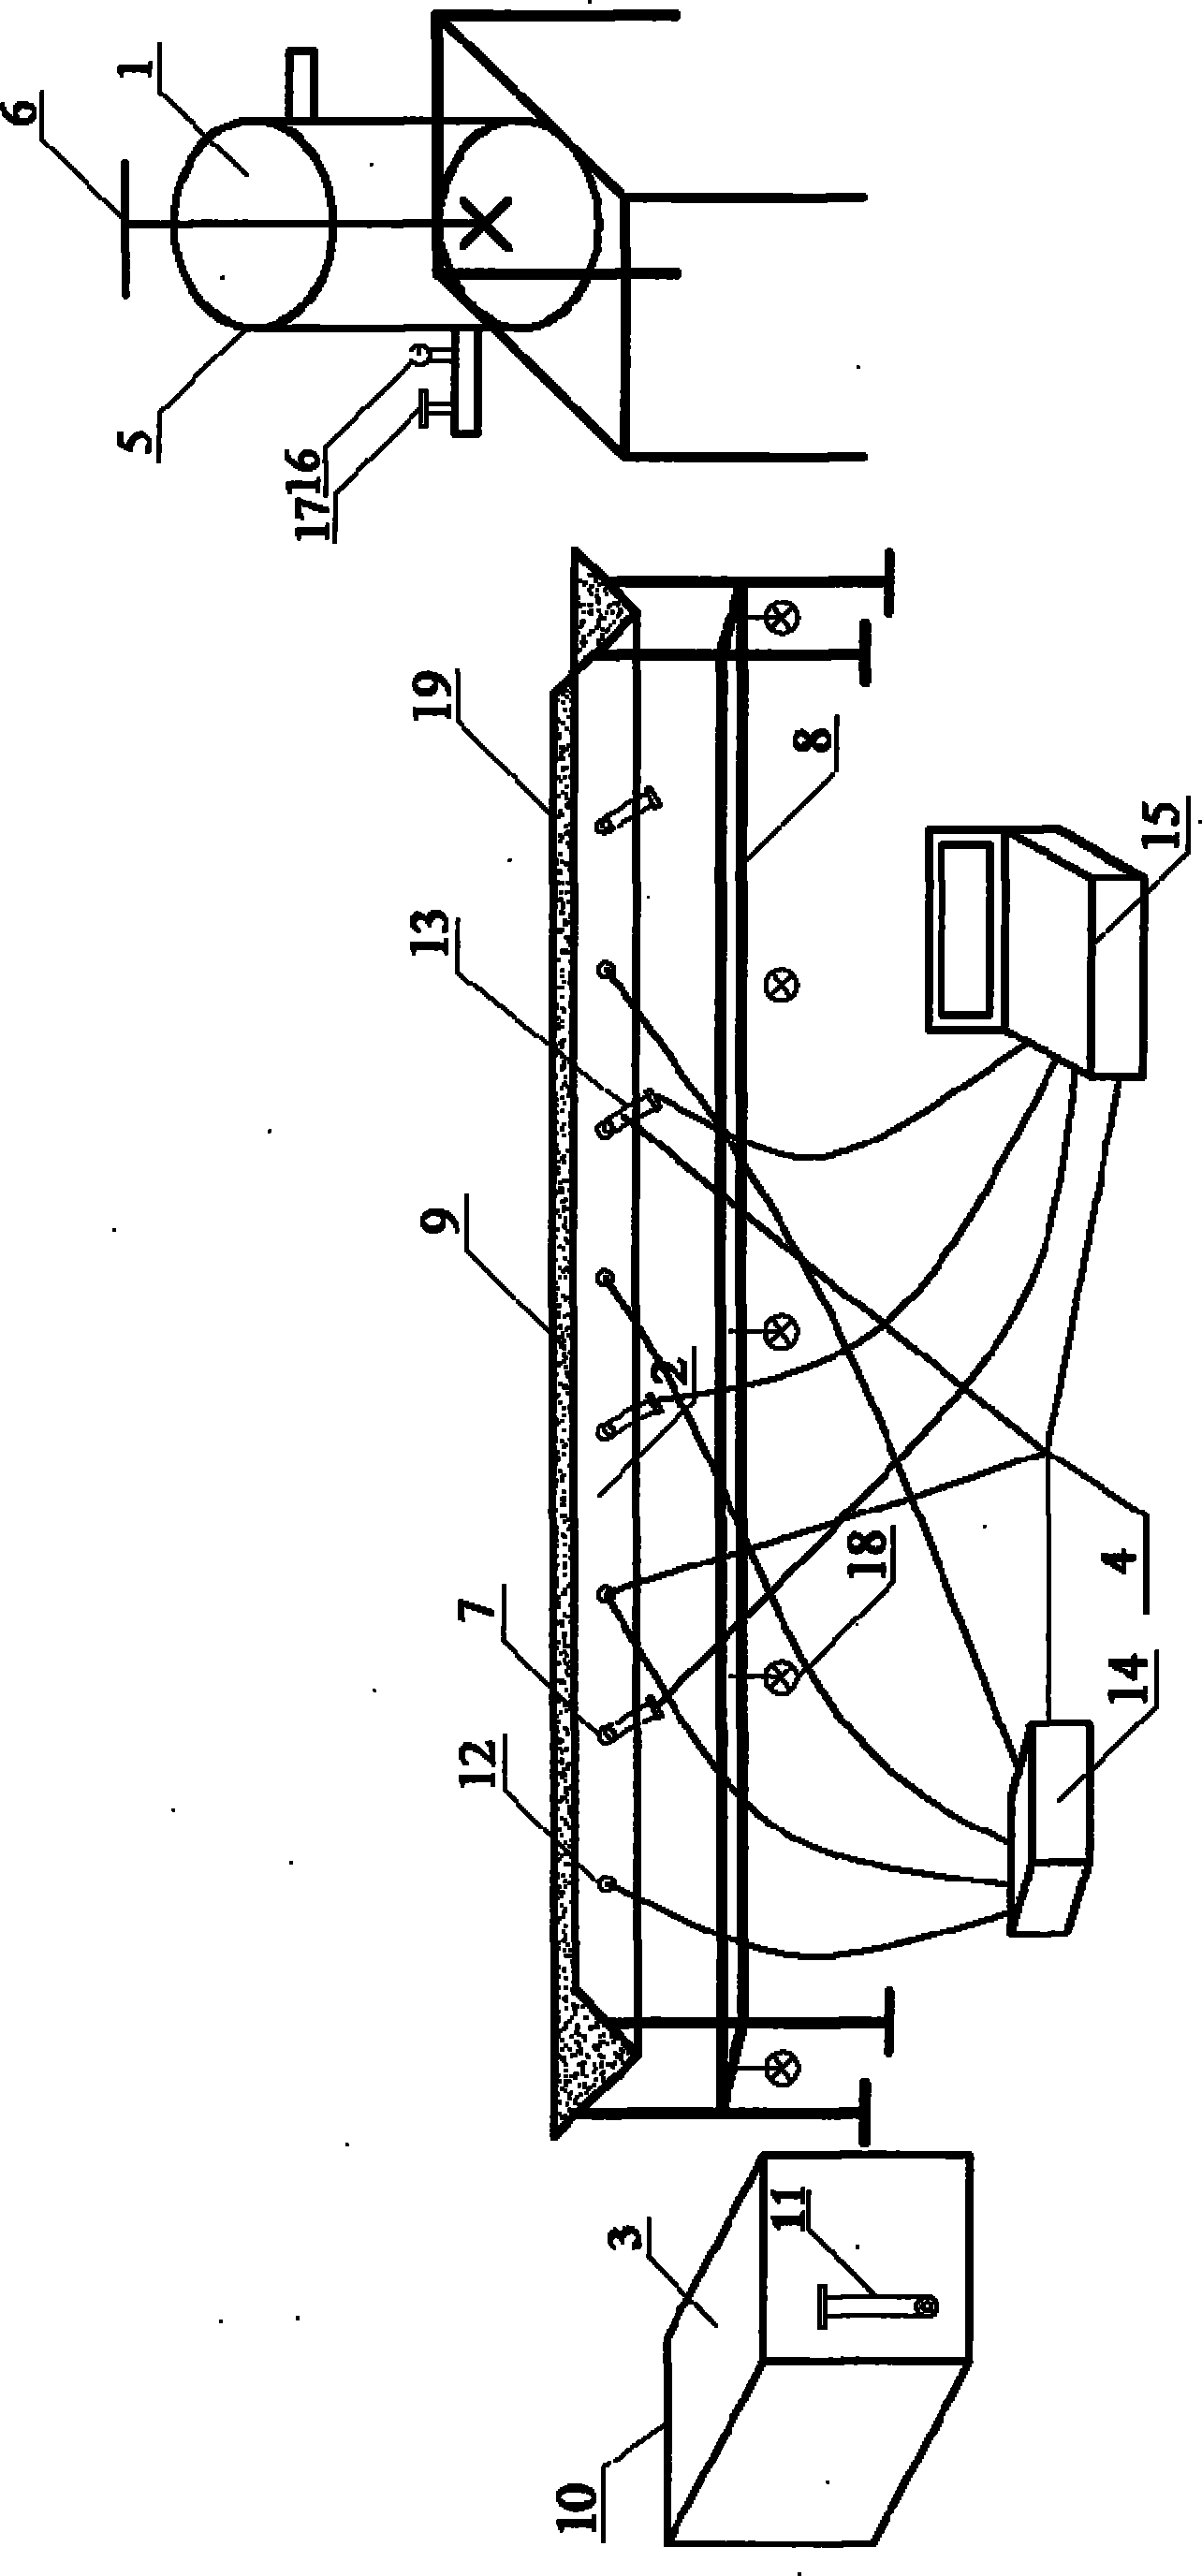 Simulation test device and test method for grassed swales